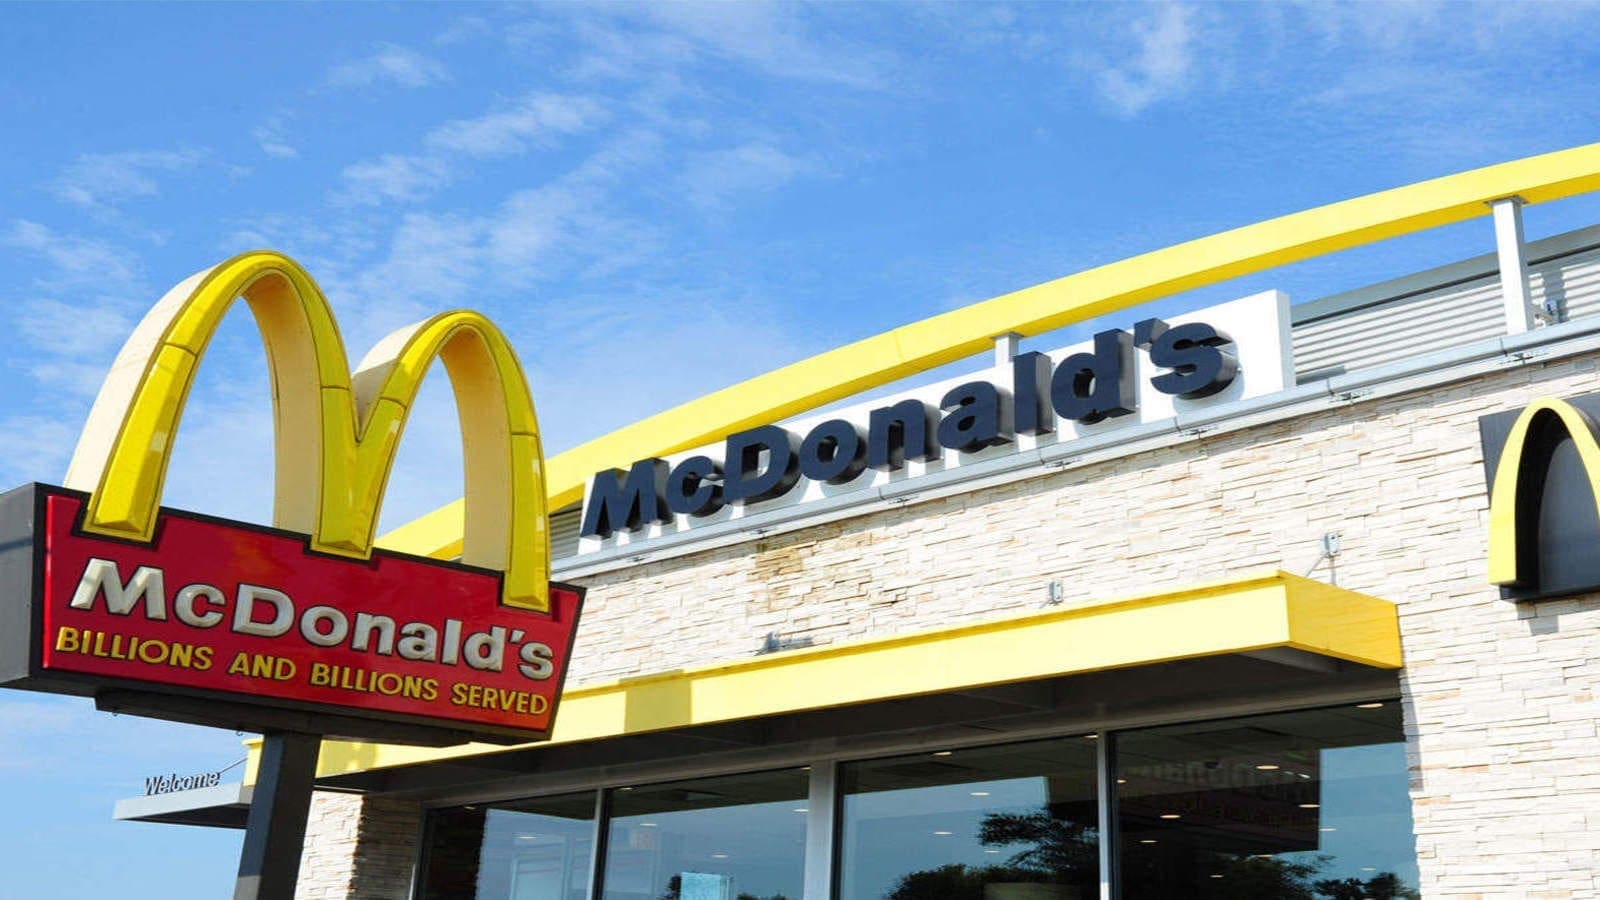 McDonald’s India embraces technology to enhance customer experience in 2021 and beyond